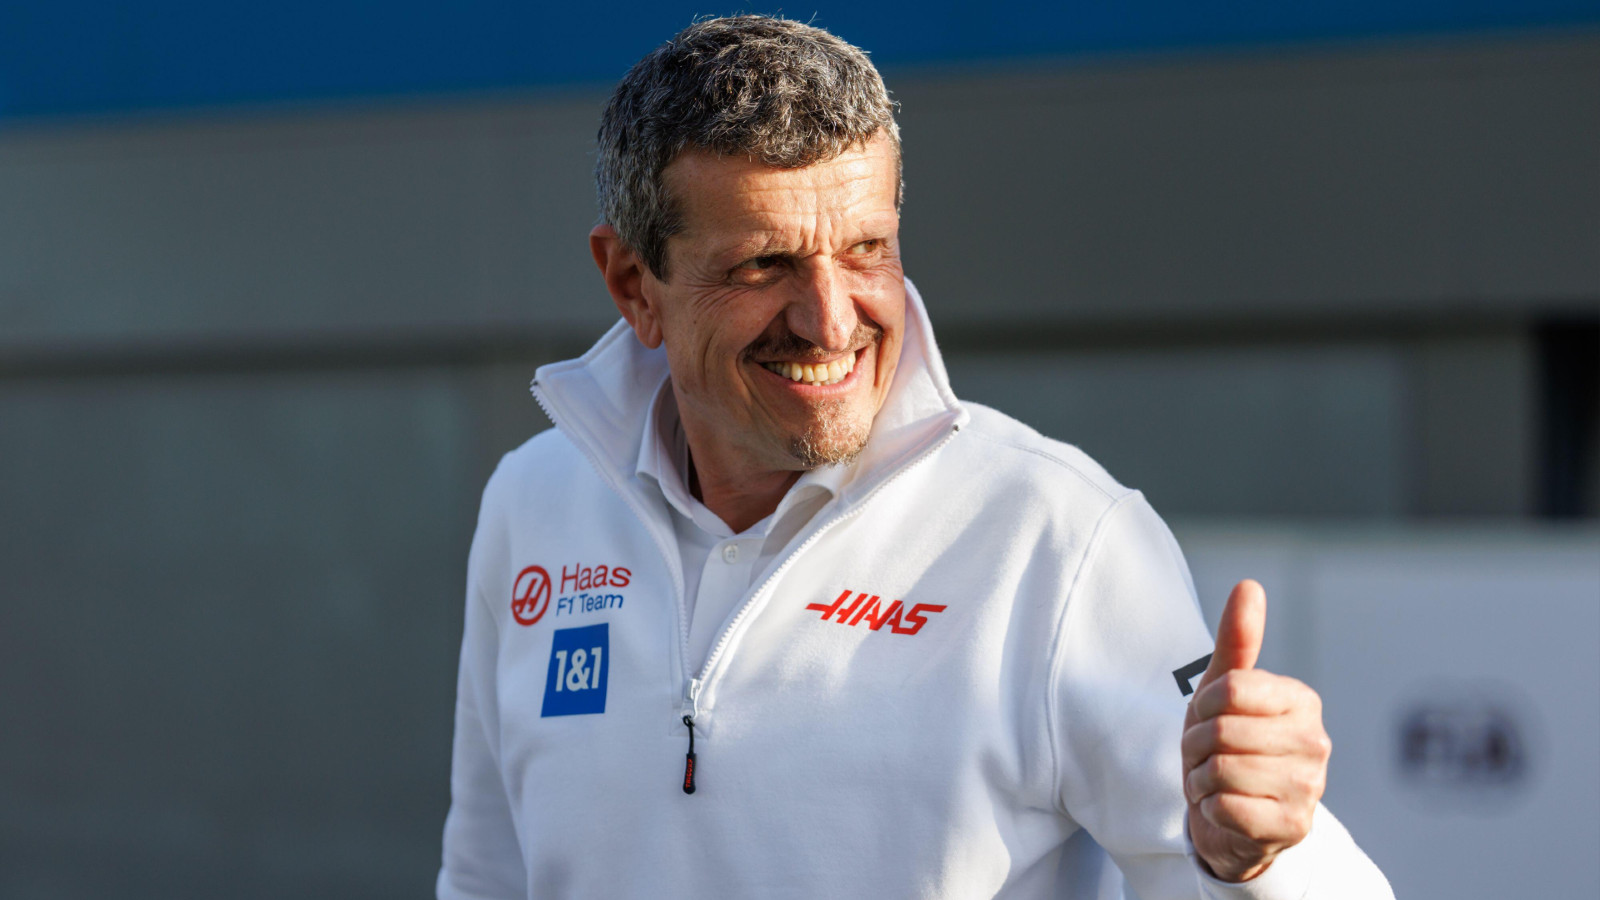 Haas team boss Guenther Steiner at the Austrian Grand Prix. Spielberg, July 2022.